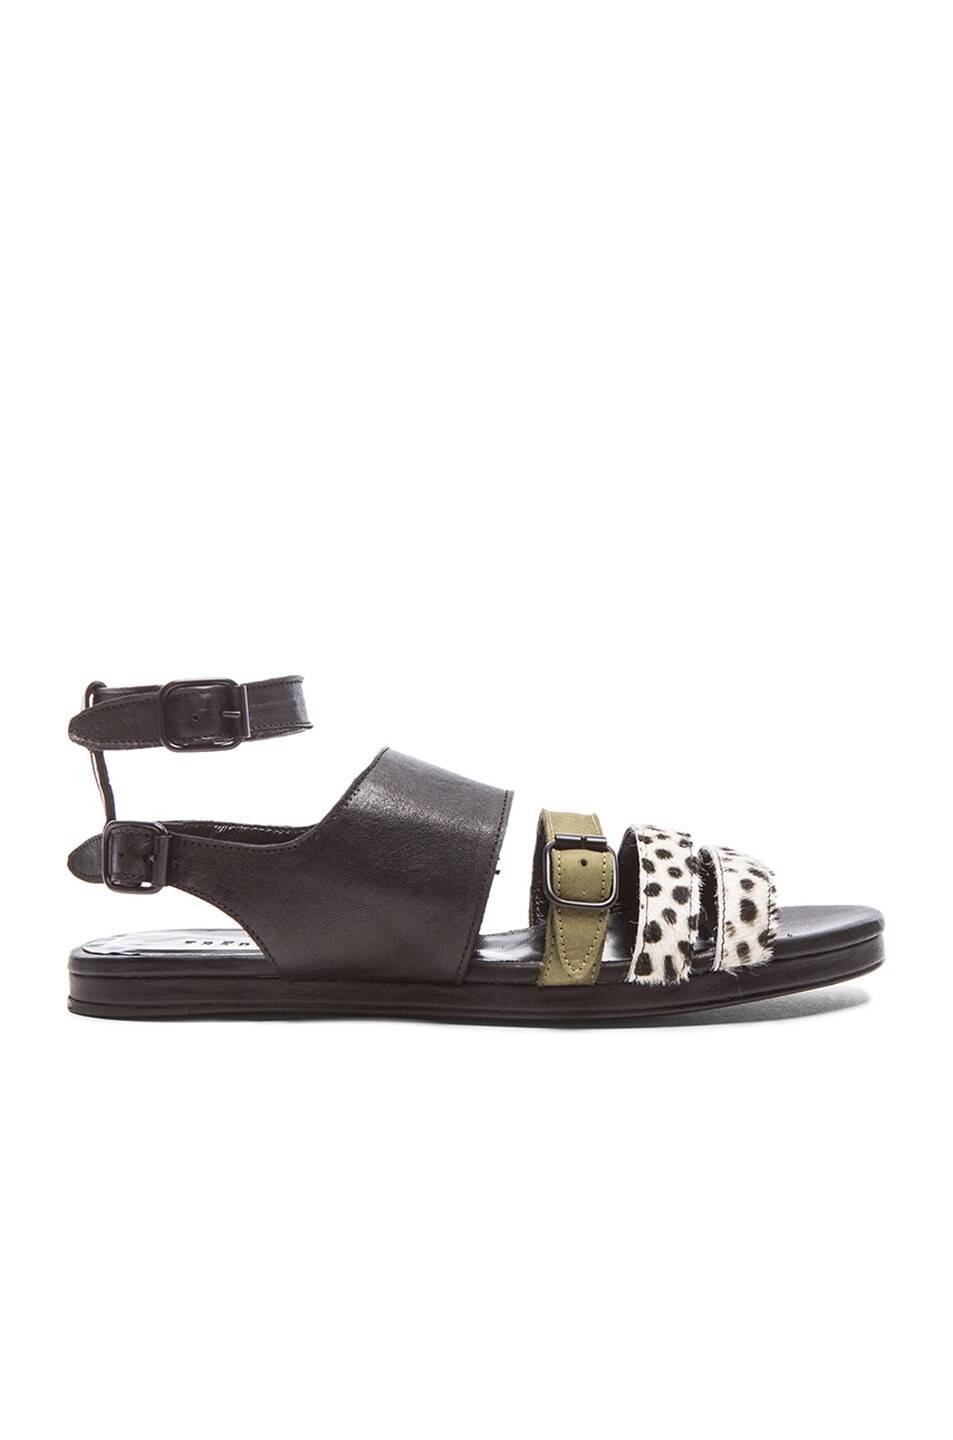 Image 1 of Freda Salvador Rhyme Sandals in Black, Military Green & White Leopard